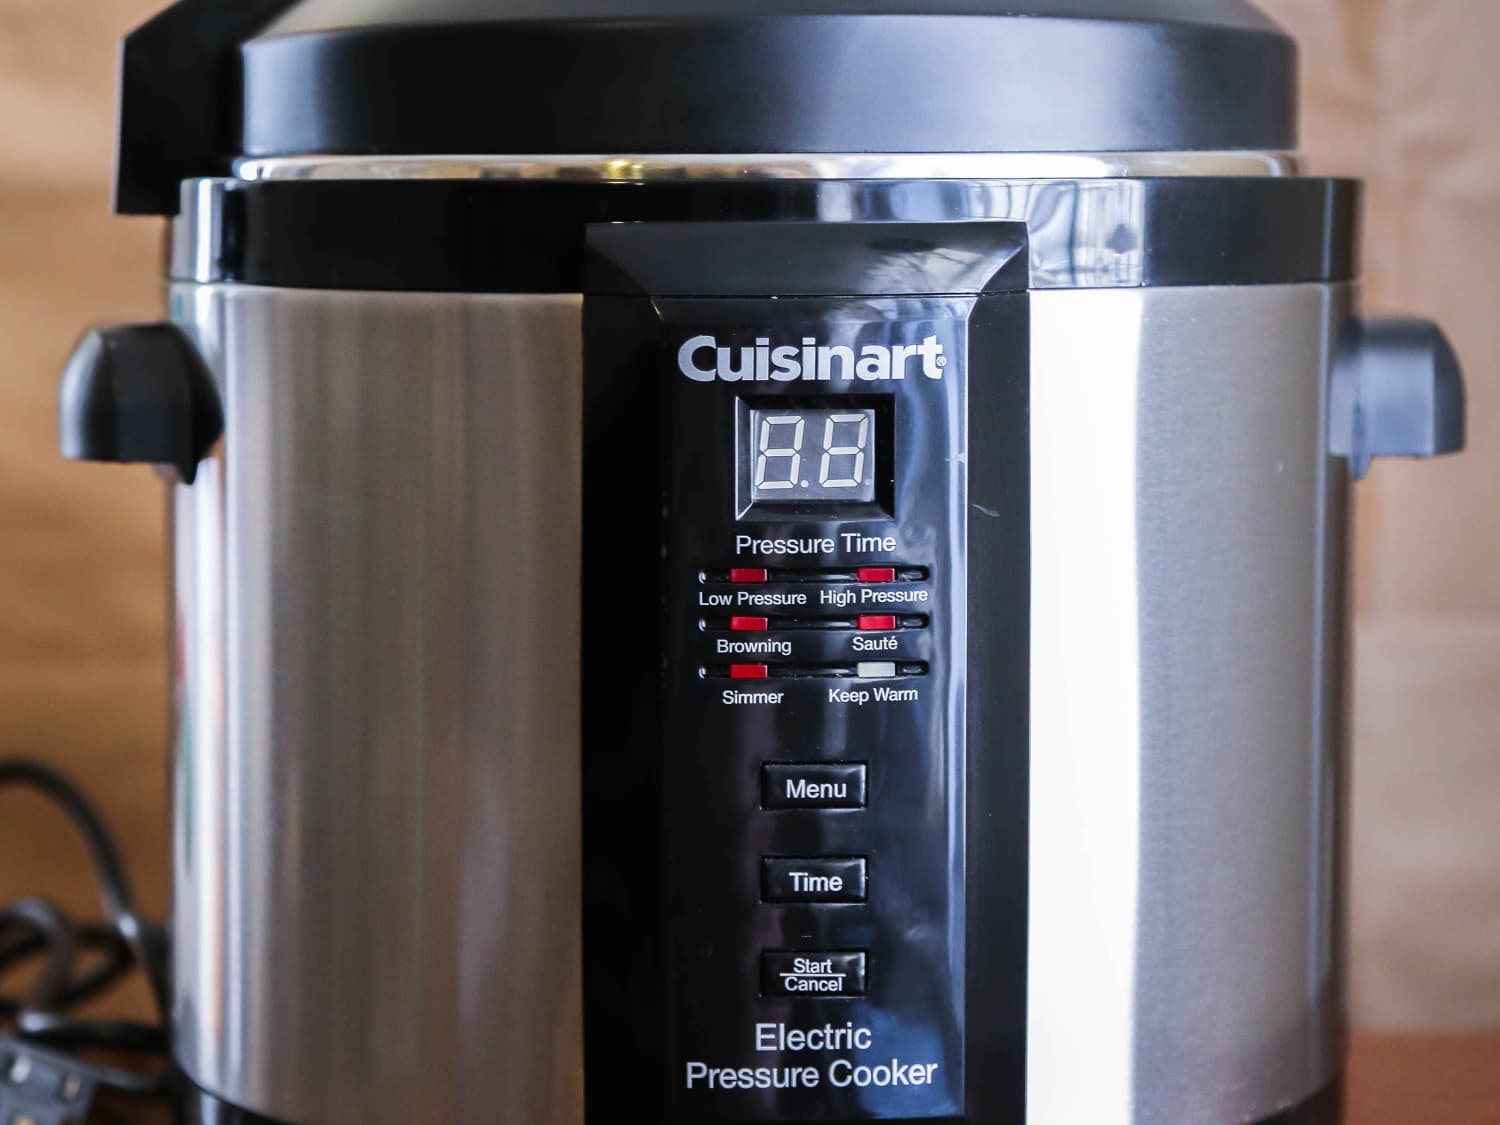 Product Review: Cuisinart Electric Pressure Cooker - Bachelor on the Cheap